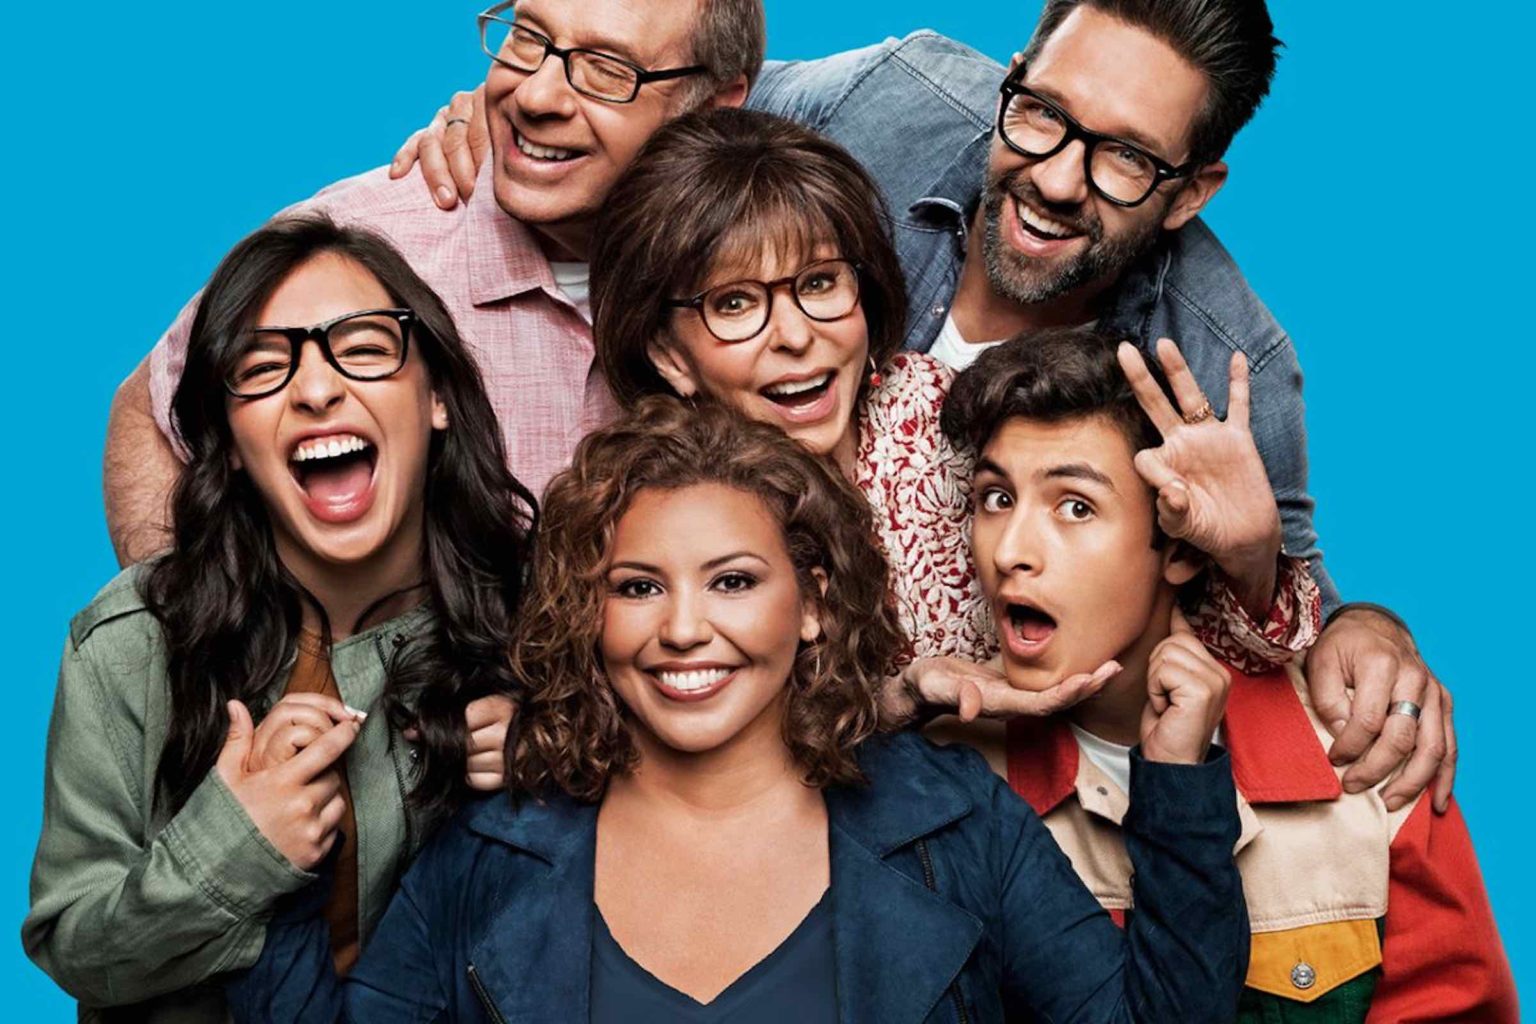 The Netflix chopping block is not the end of the road. 'One Day at a Time' has been revived for season 4. Here's why you should watch.